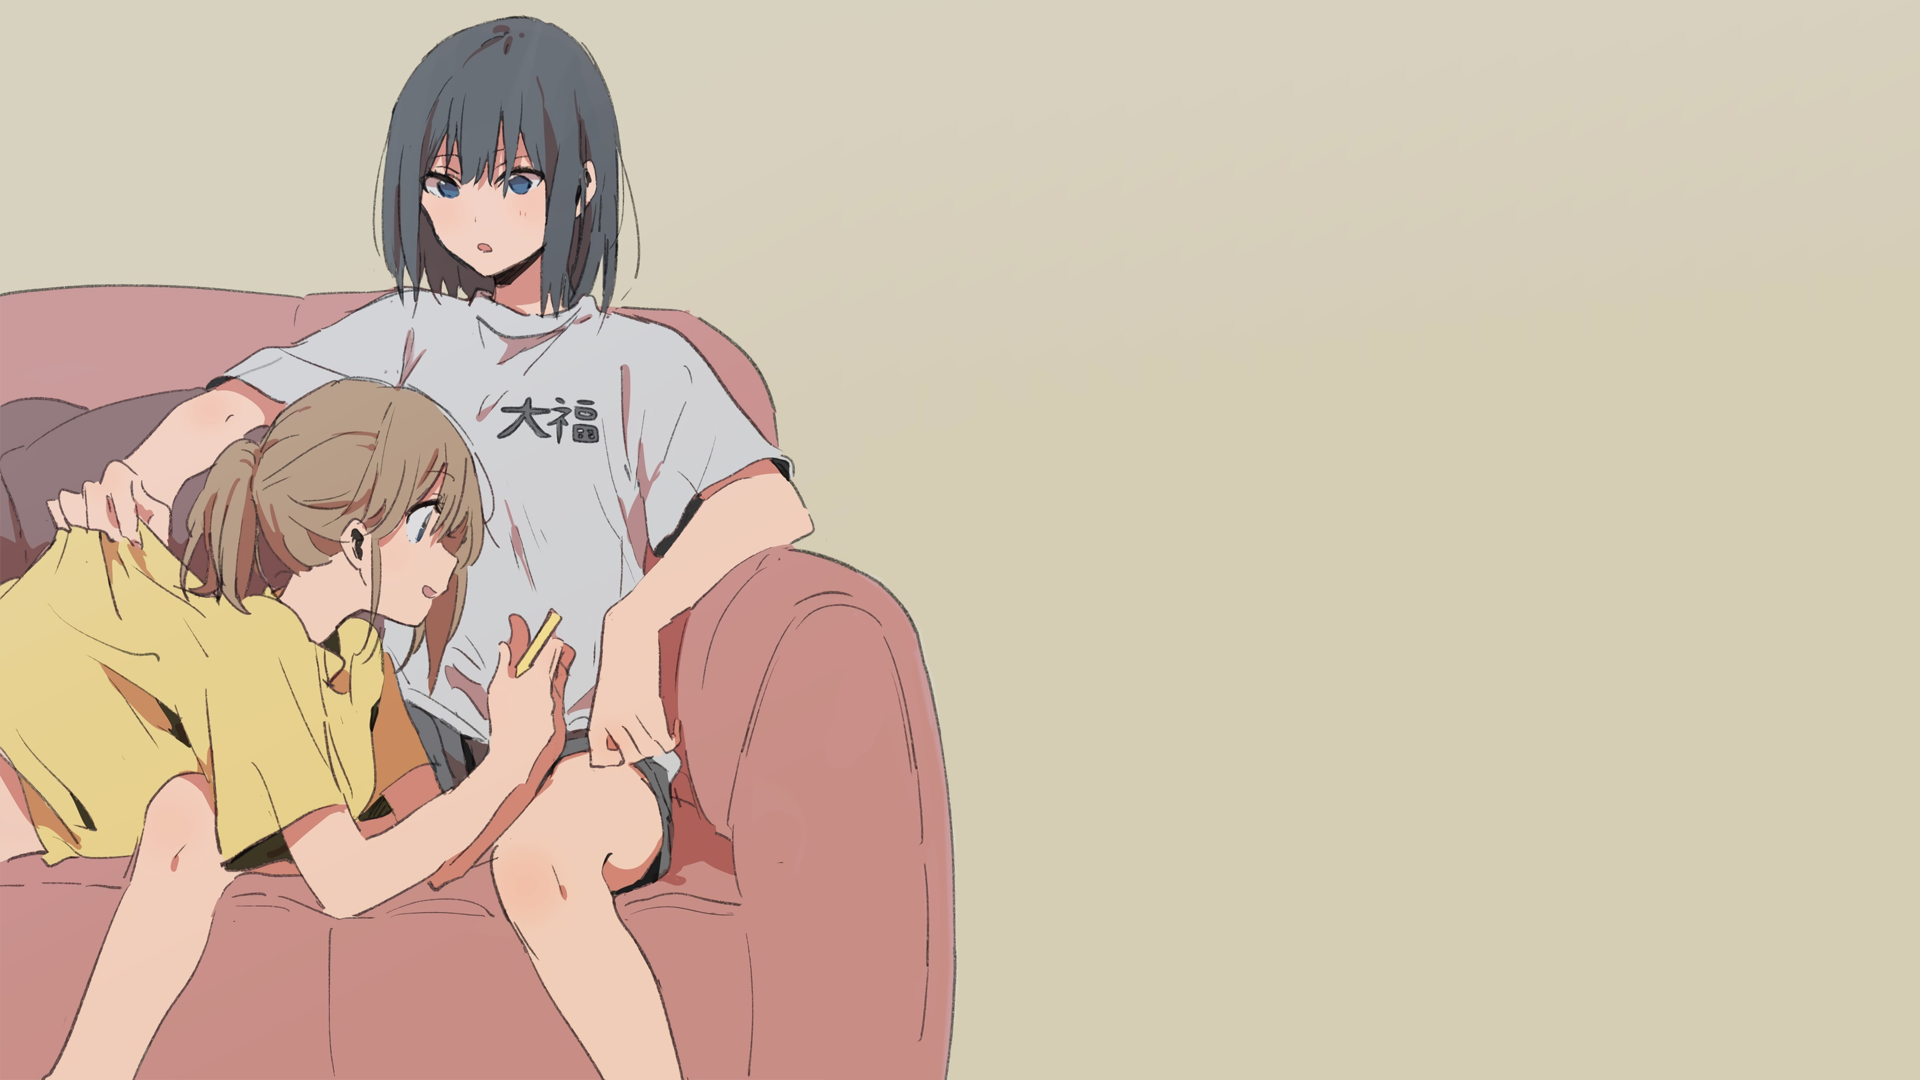 Anime 1920x1080 anime manga anime girls minimalism simple background schoolgirl couch Chill Out